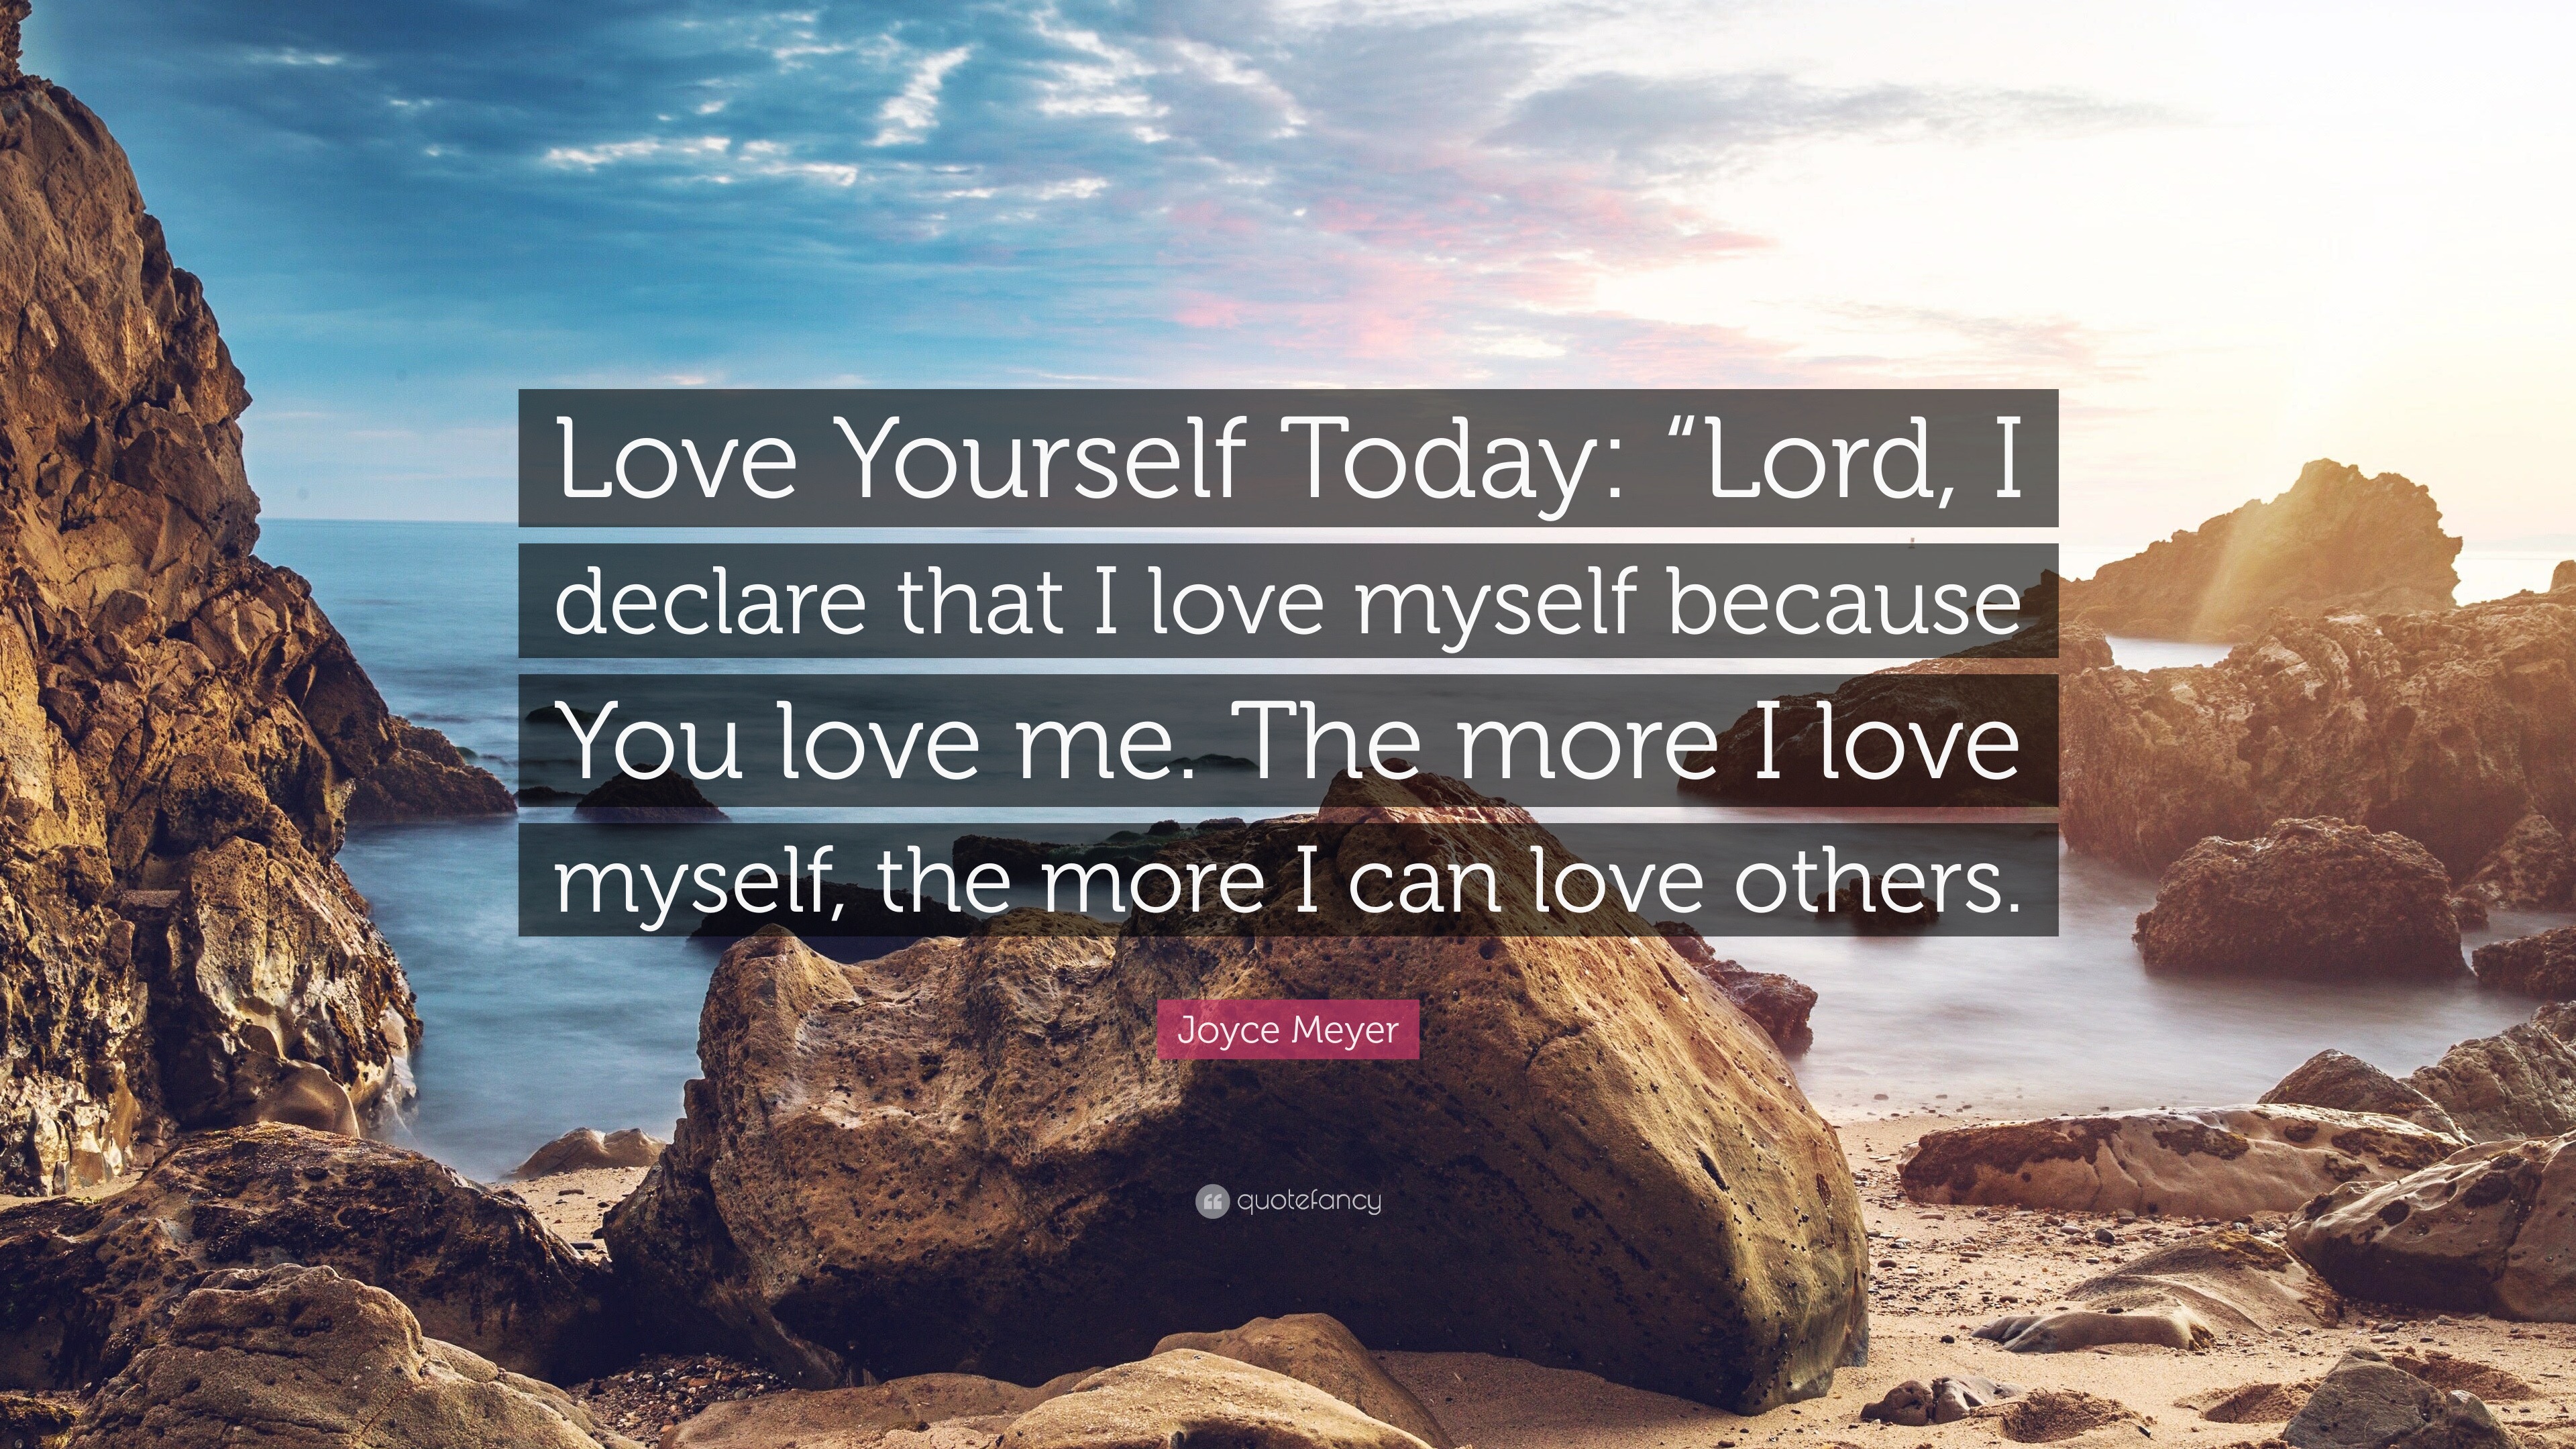 Joyce Meyer Quote Love Yourself Today Lord I Declare That I Love Myself Because You Love Me The More I Love Myself The More I Can Lov